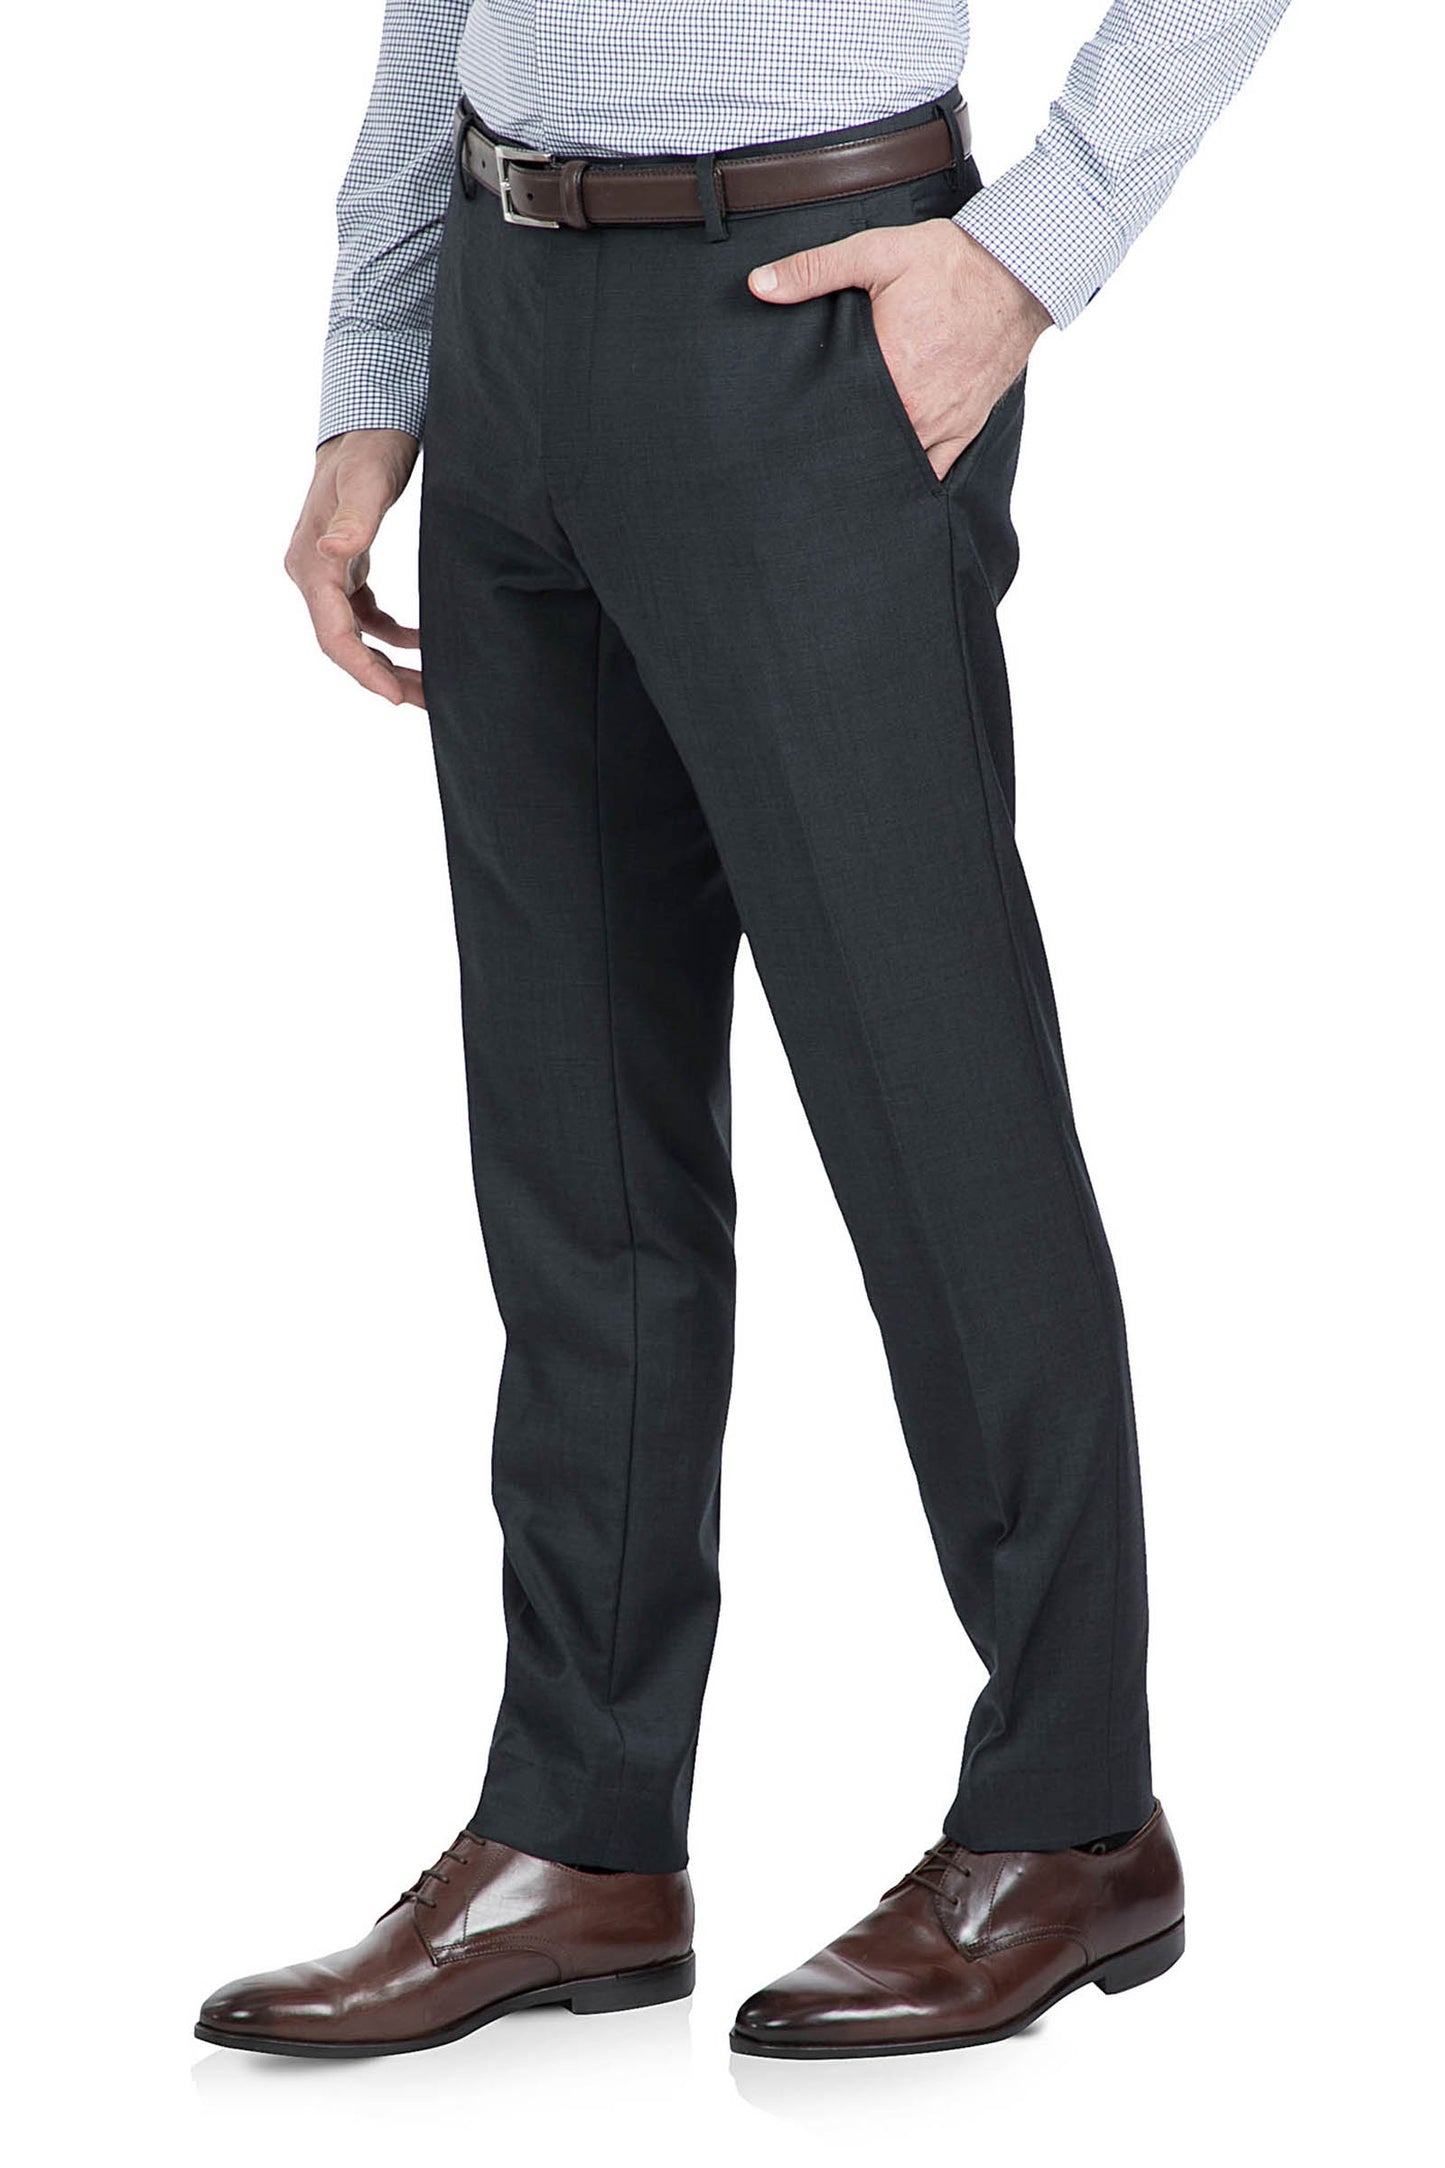 GIBSON SLIM FIT CHARCOAL CAPER TROUSER